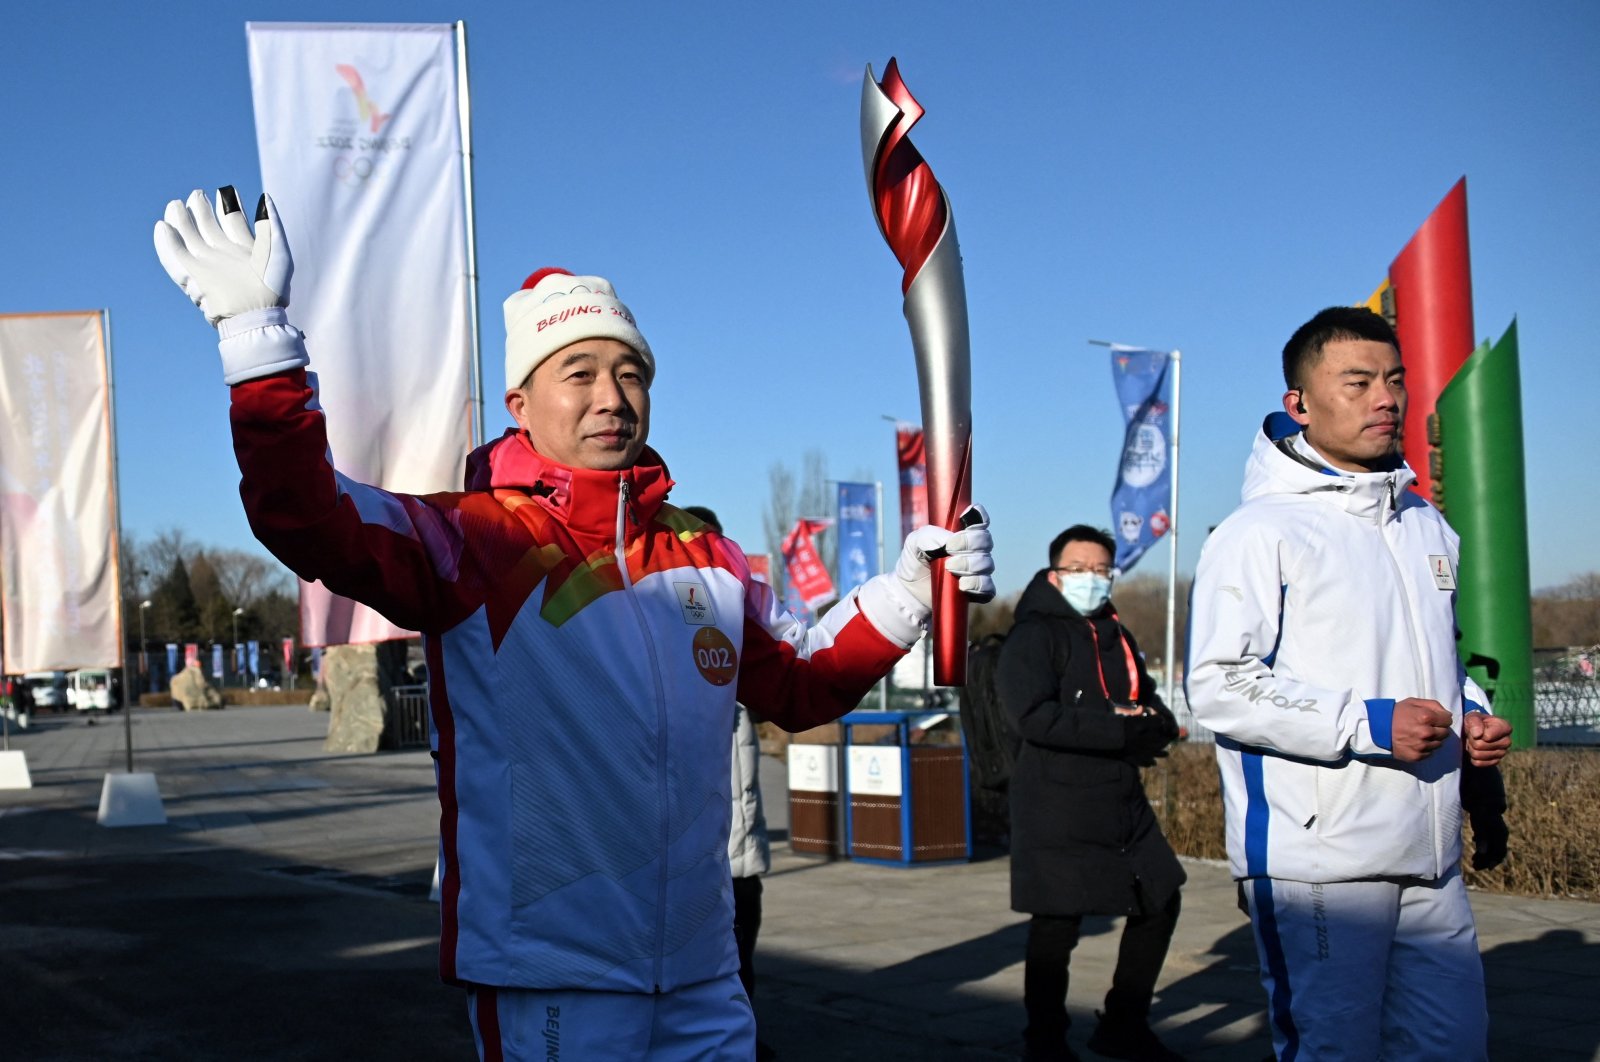 Chinese astronaut Jing Haipeng (L) holds the Olympic Torch during the torch relay launch ceremony at Olympic Forest Park, Beijing, China, Feb. 2, 2022. (AFP Photo)